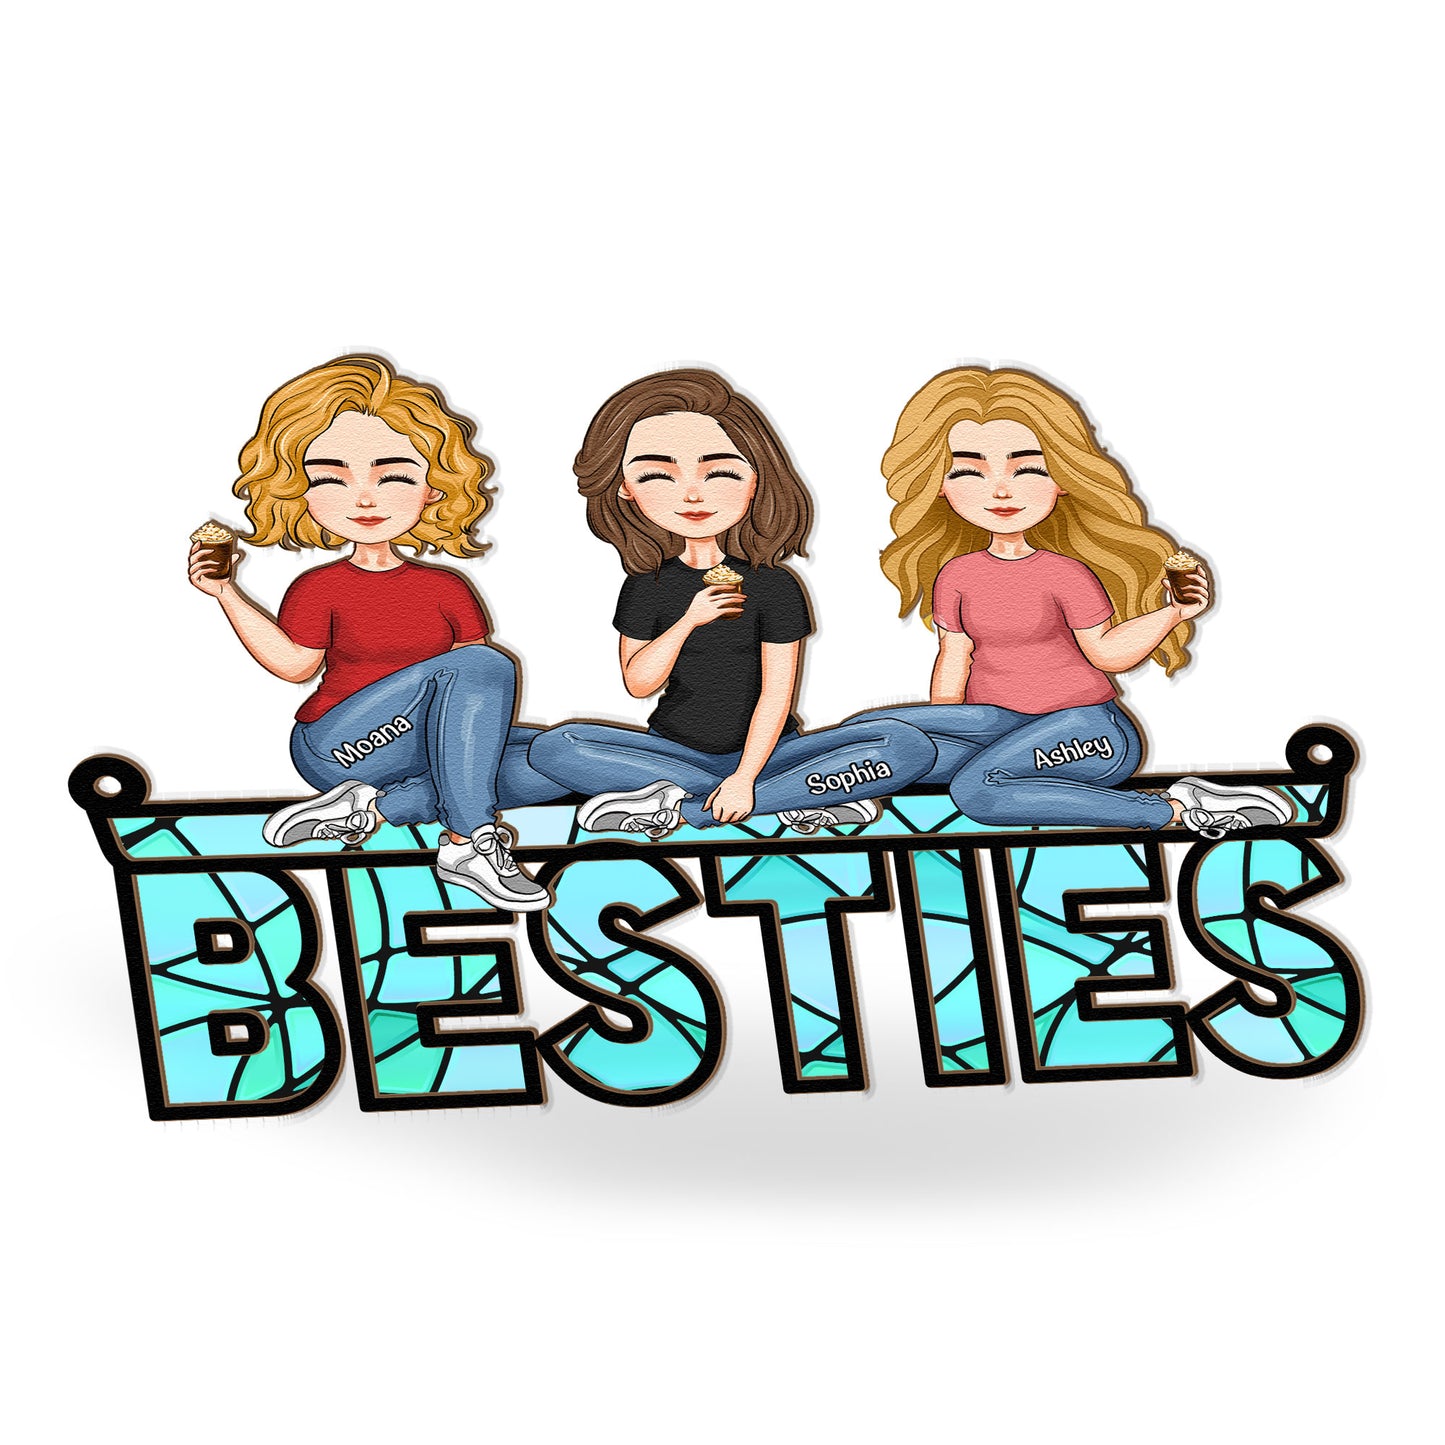 Besties Sitting Together - Personalized Window Hanging Suncatcher Ornament